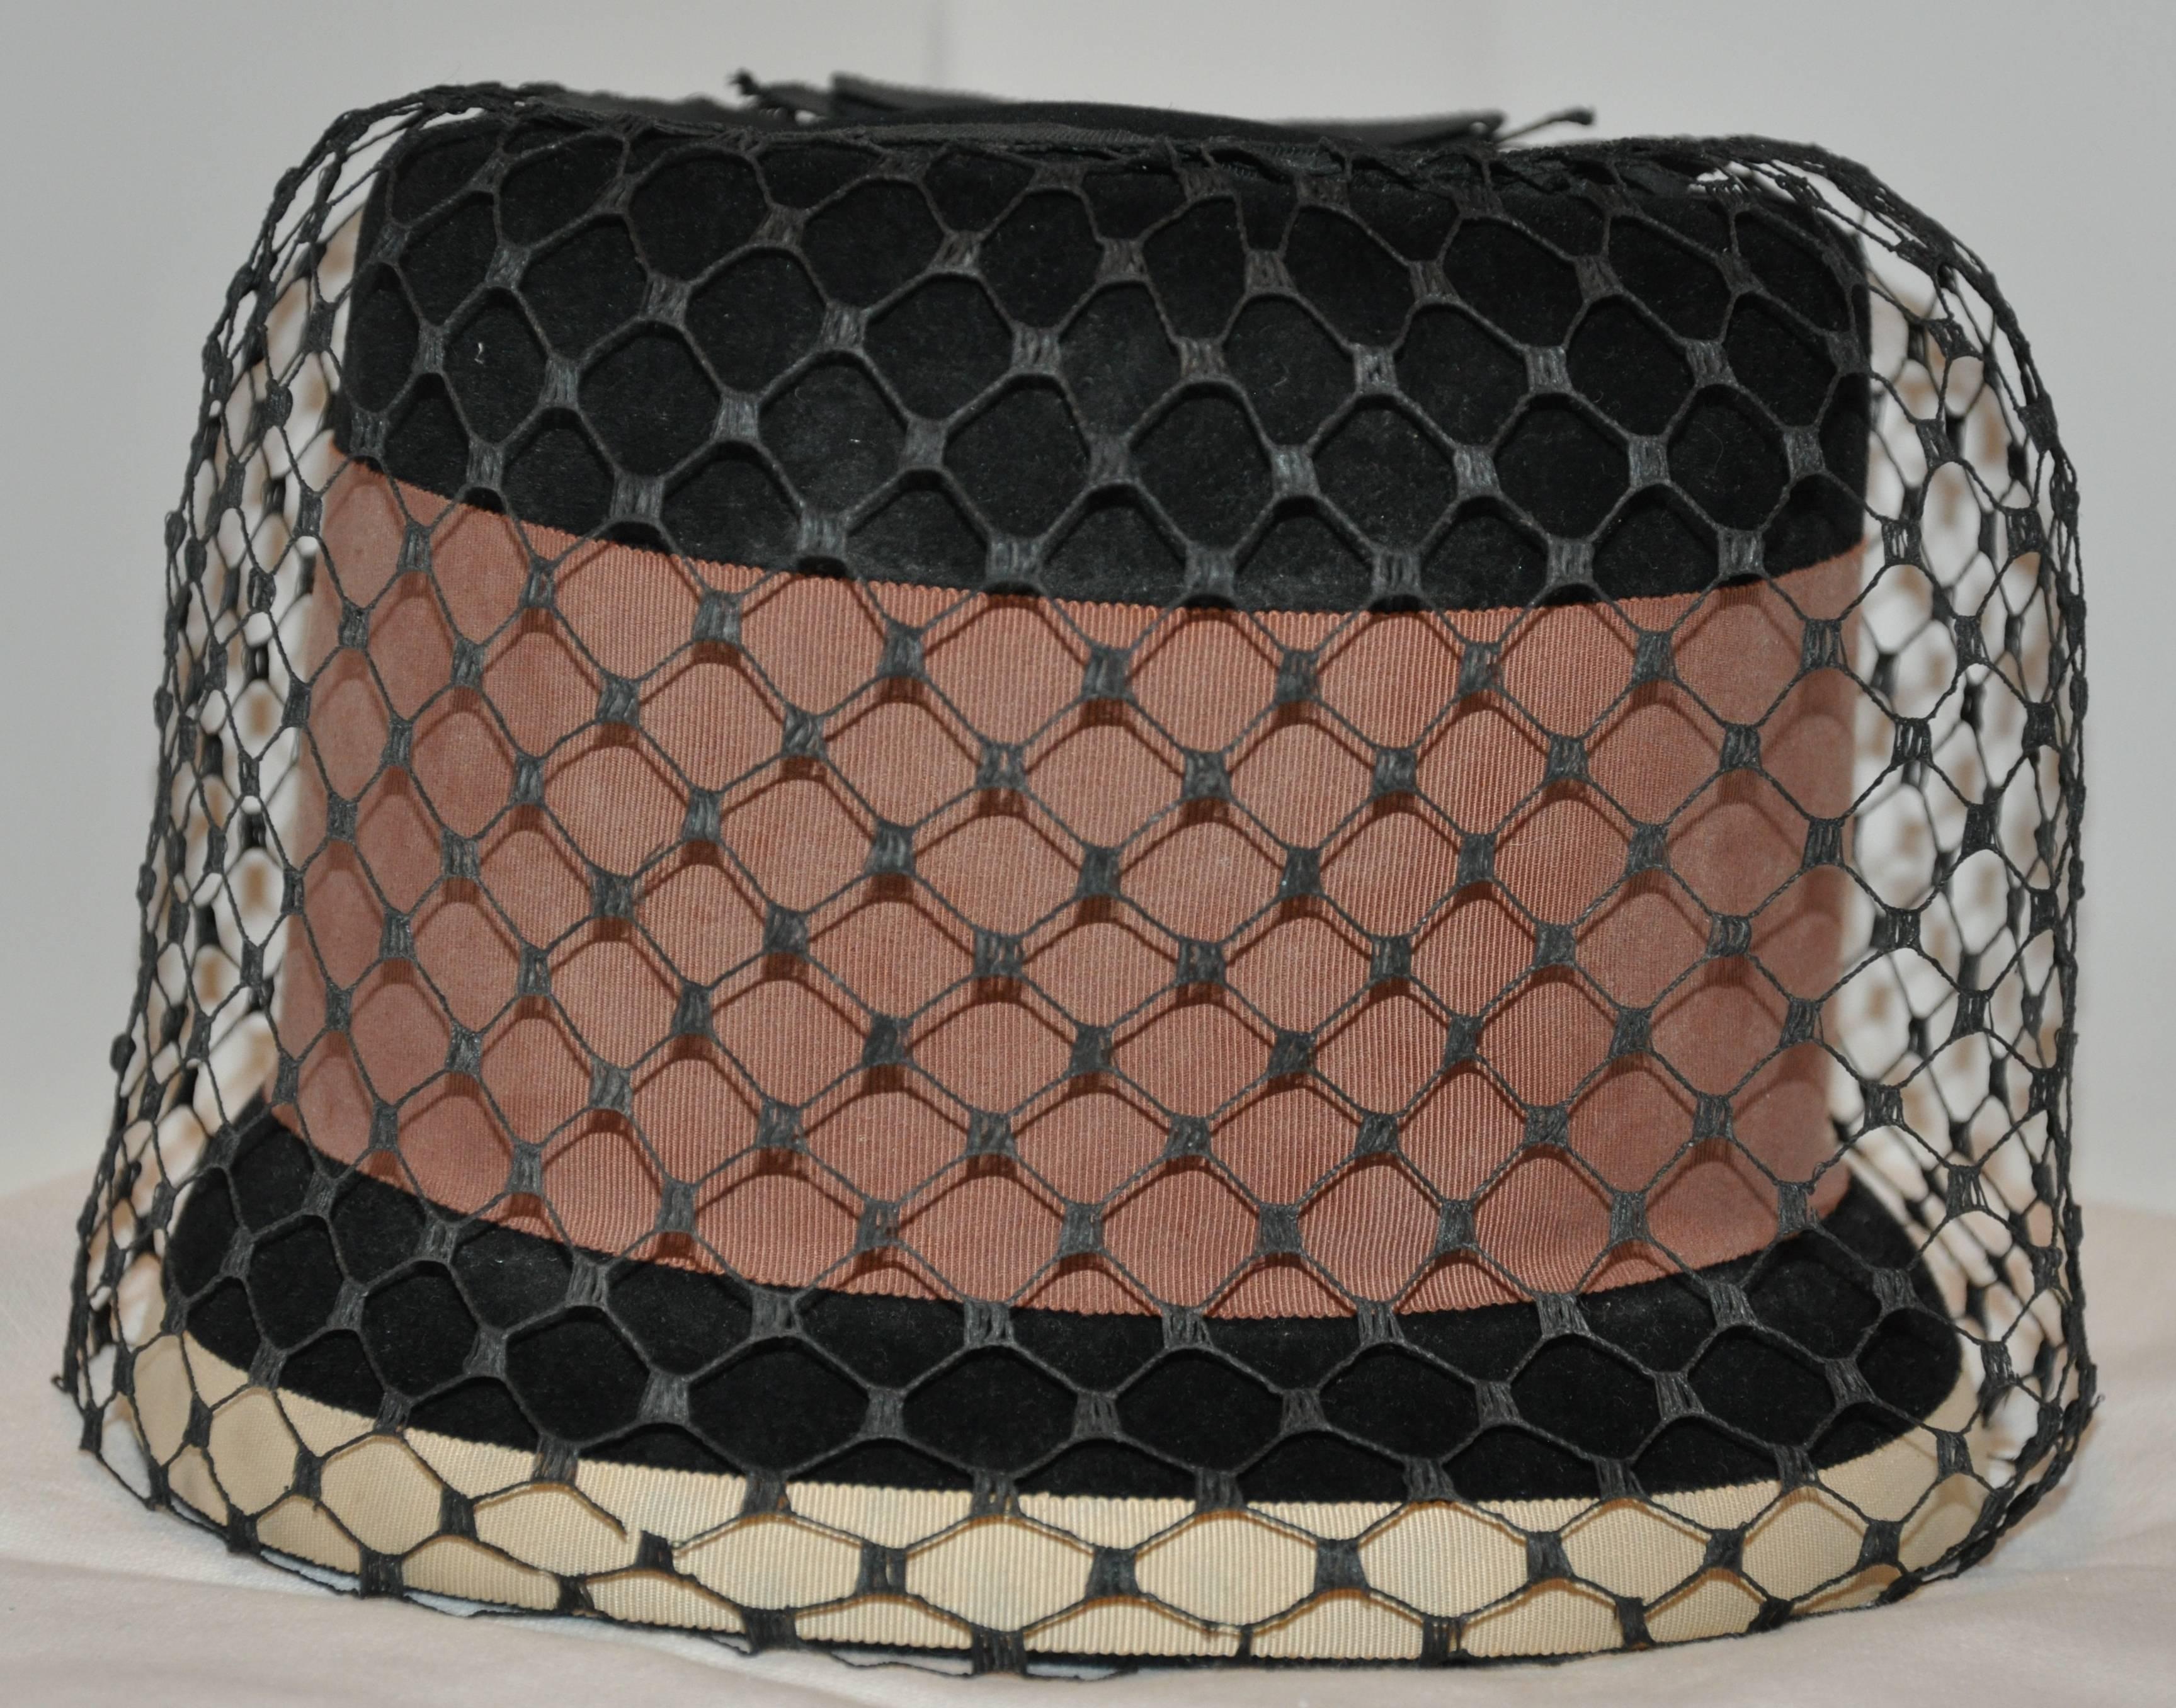           Whimsical Tall black wool felt hat is detailed with a width warm-brown silk cord band as well as a beige silk cord and finished with a wonderful full netted and a simple silk bow on top. The interior circumference measures 21 inches.